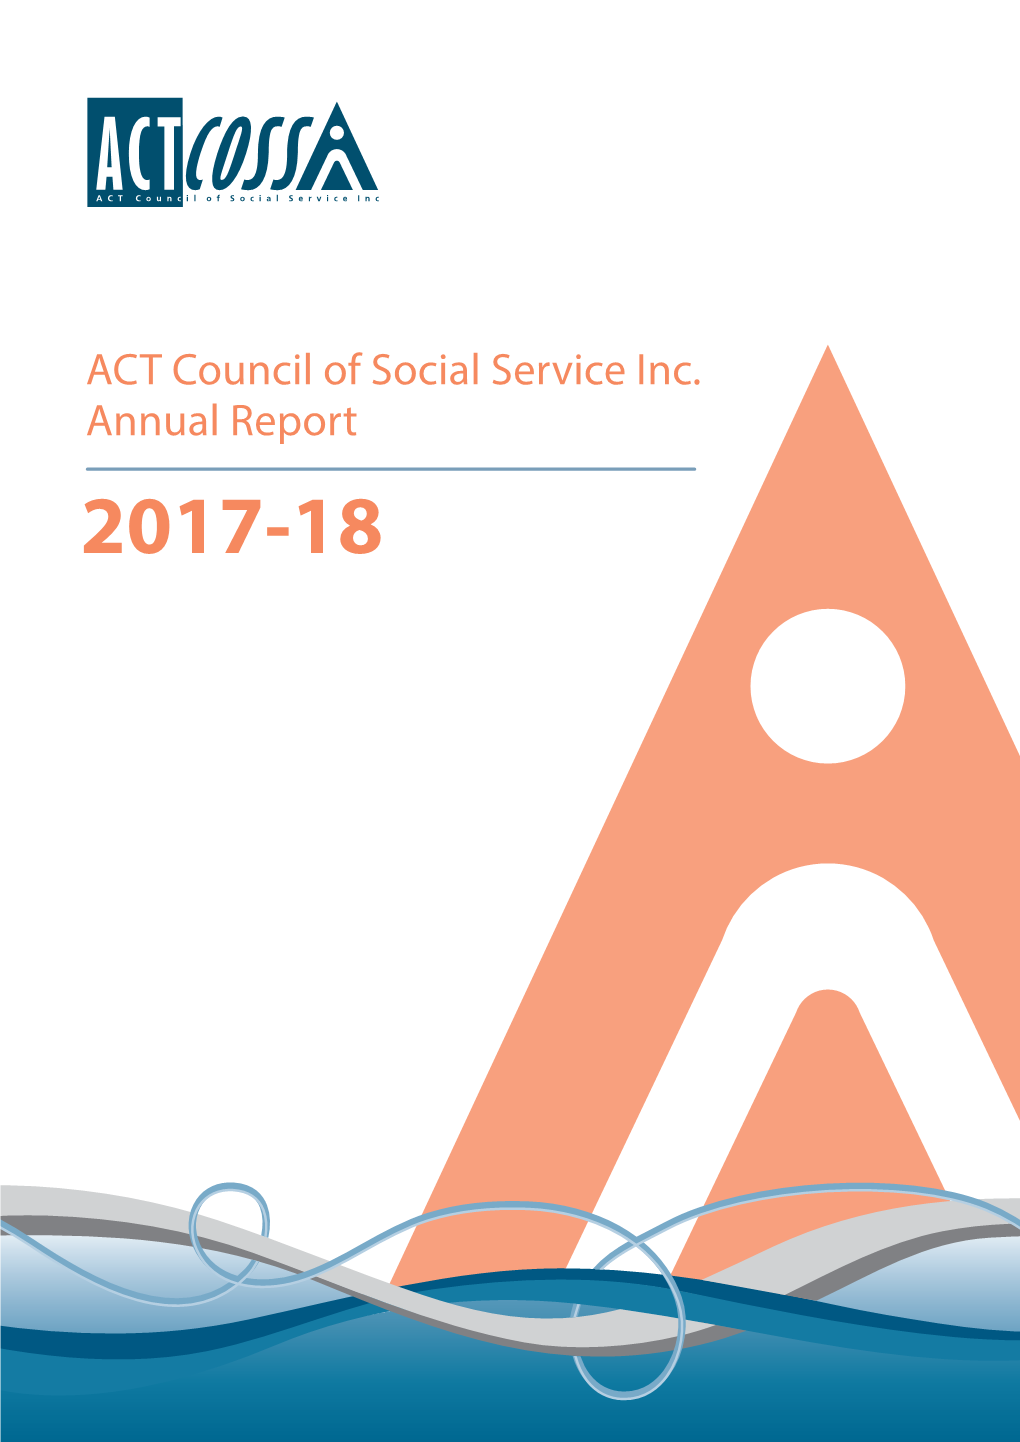 ACT Council of Social Service Inc. (ACTCOSS) Annual Report 2017-18